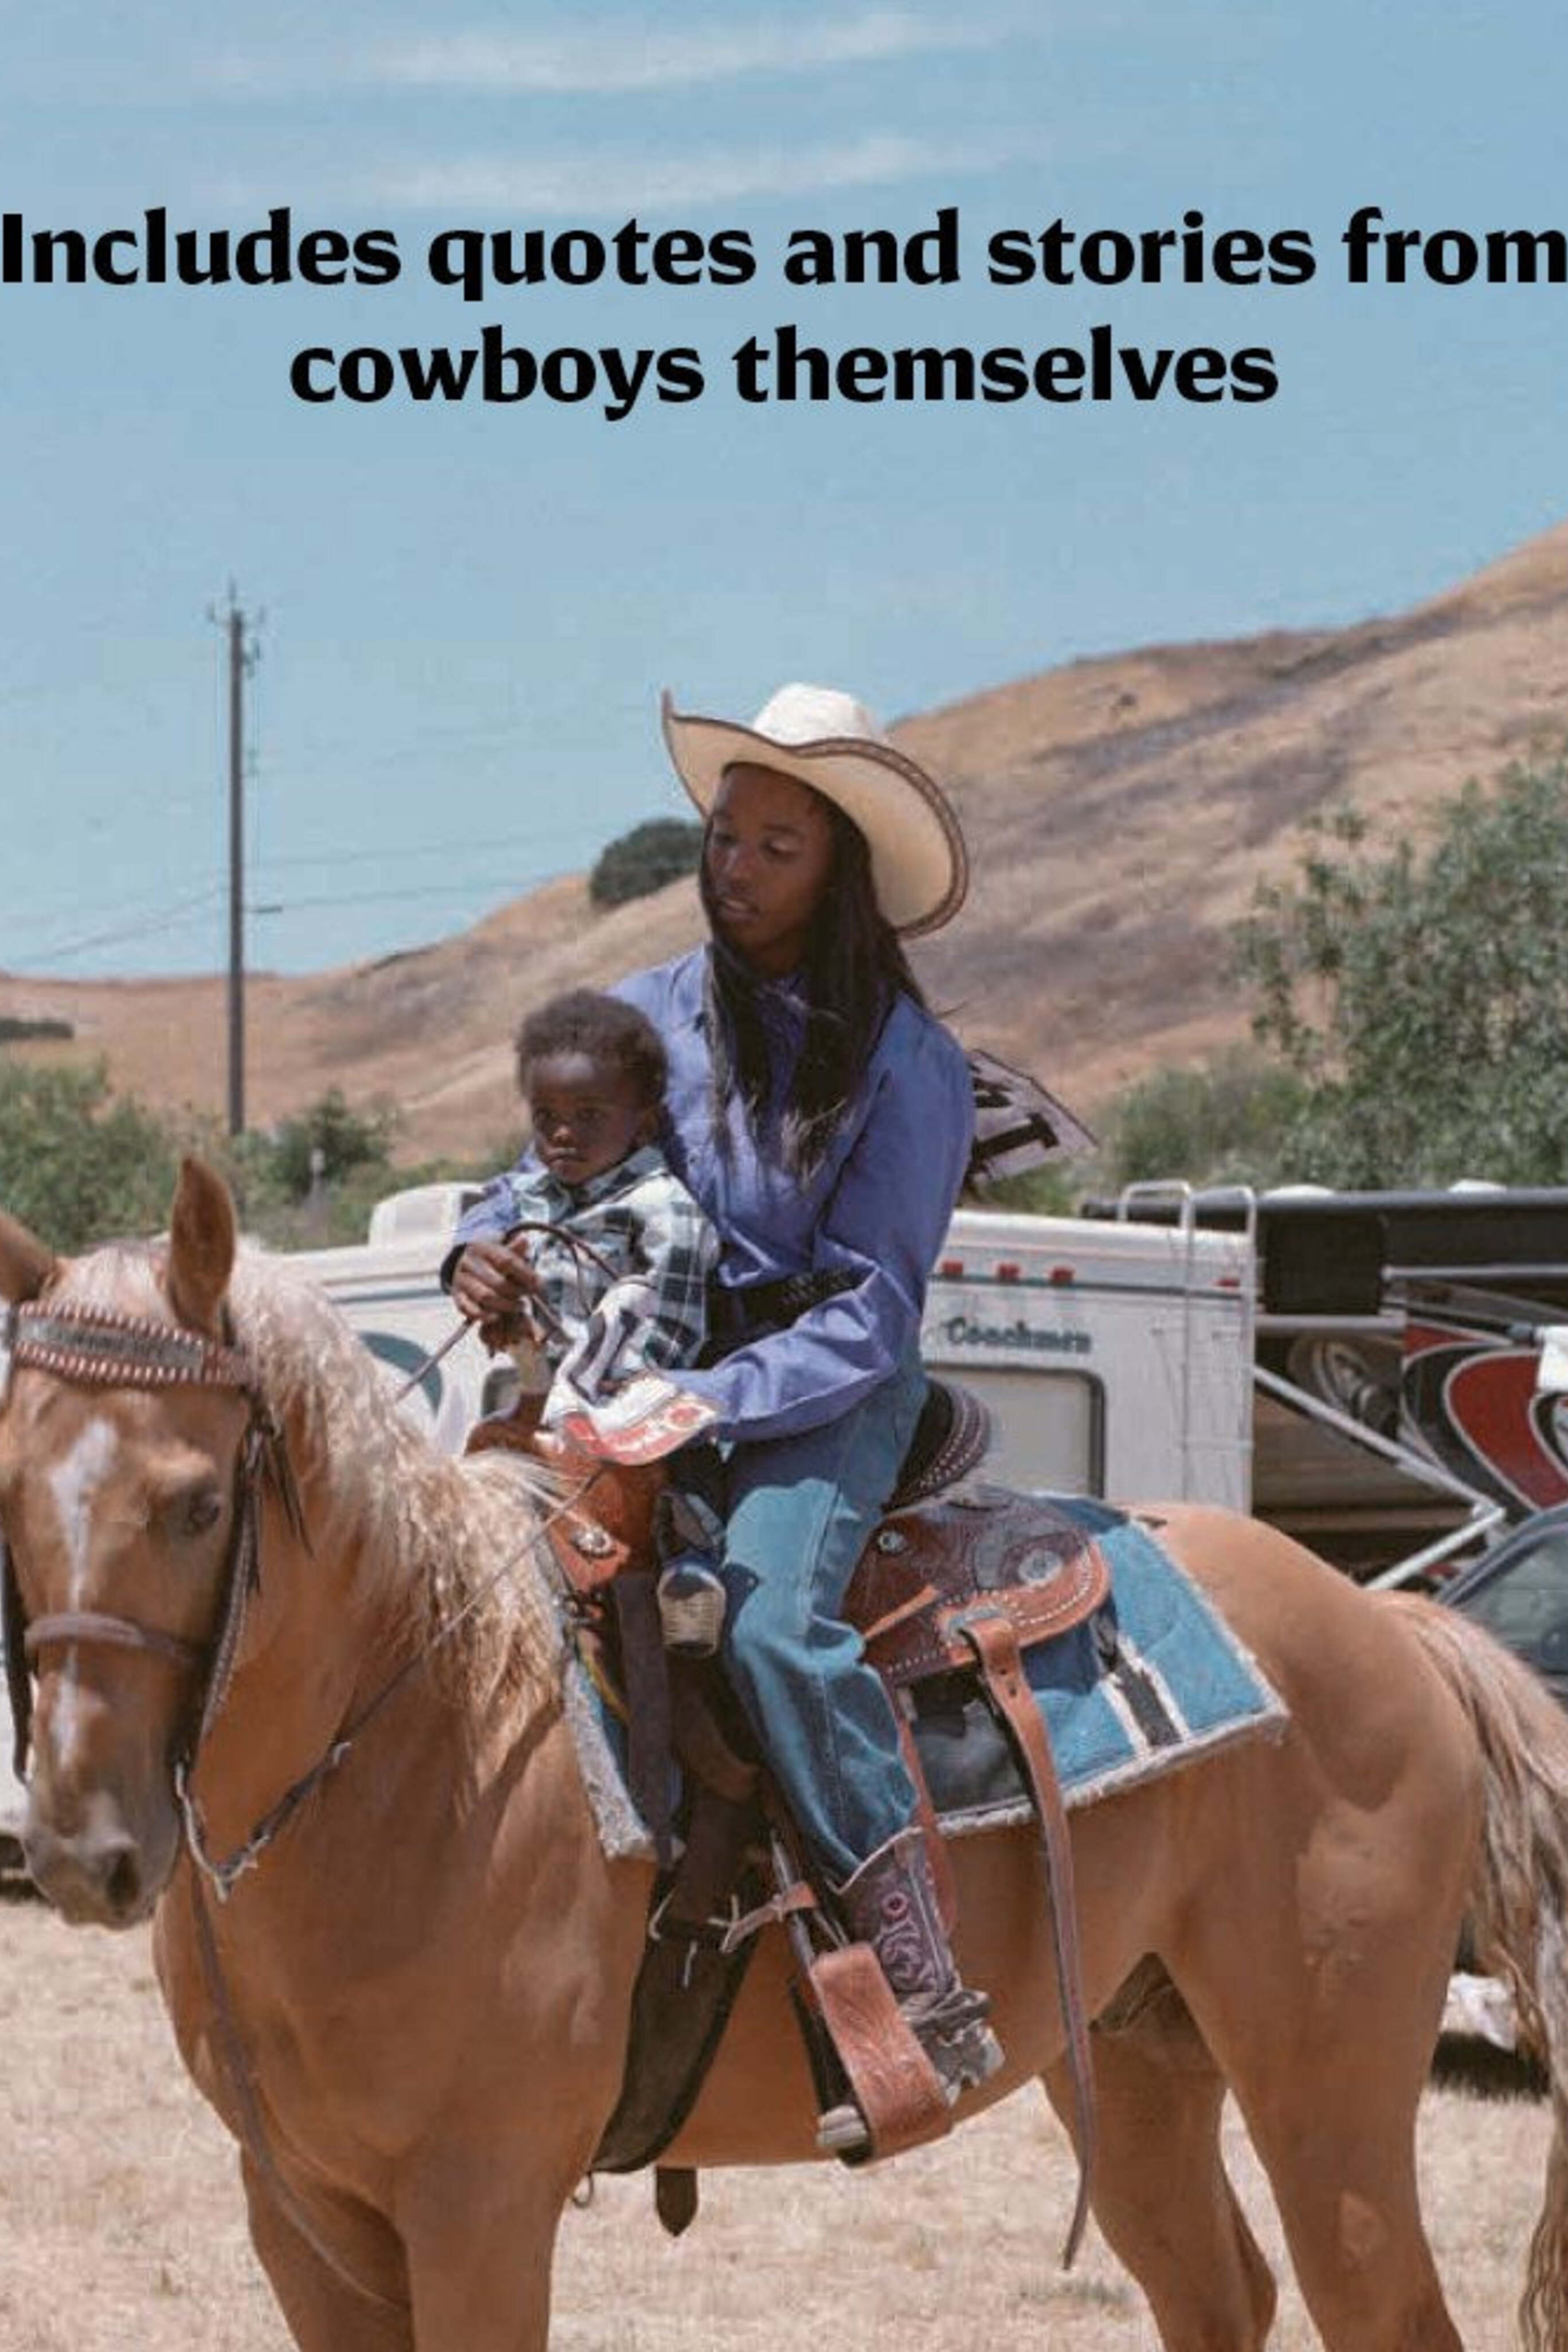 The New Black West: Photographs from America's Only Touring Black Rodeo by Gabriela Hasbun